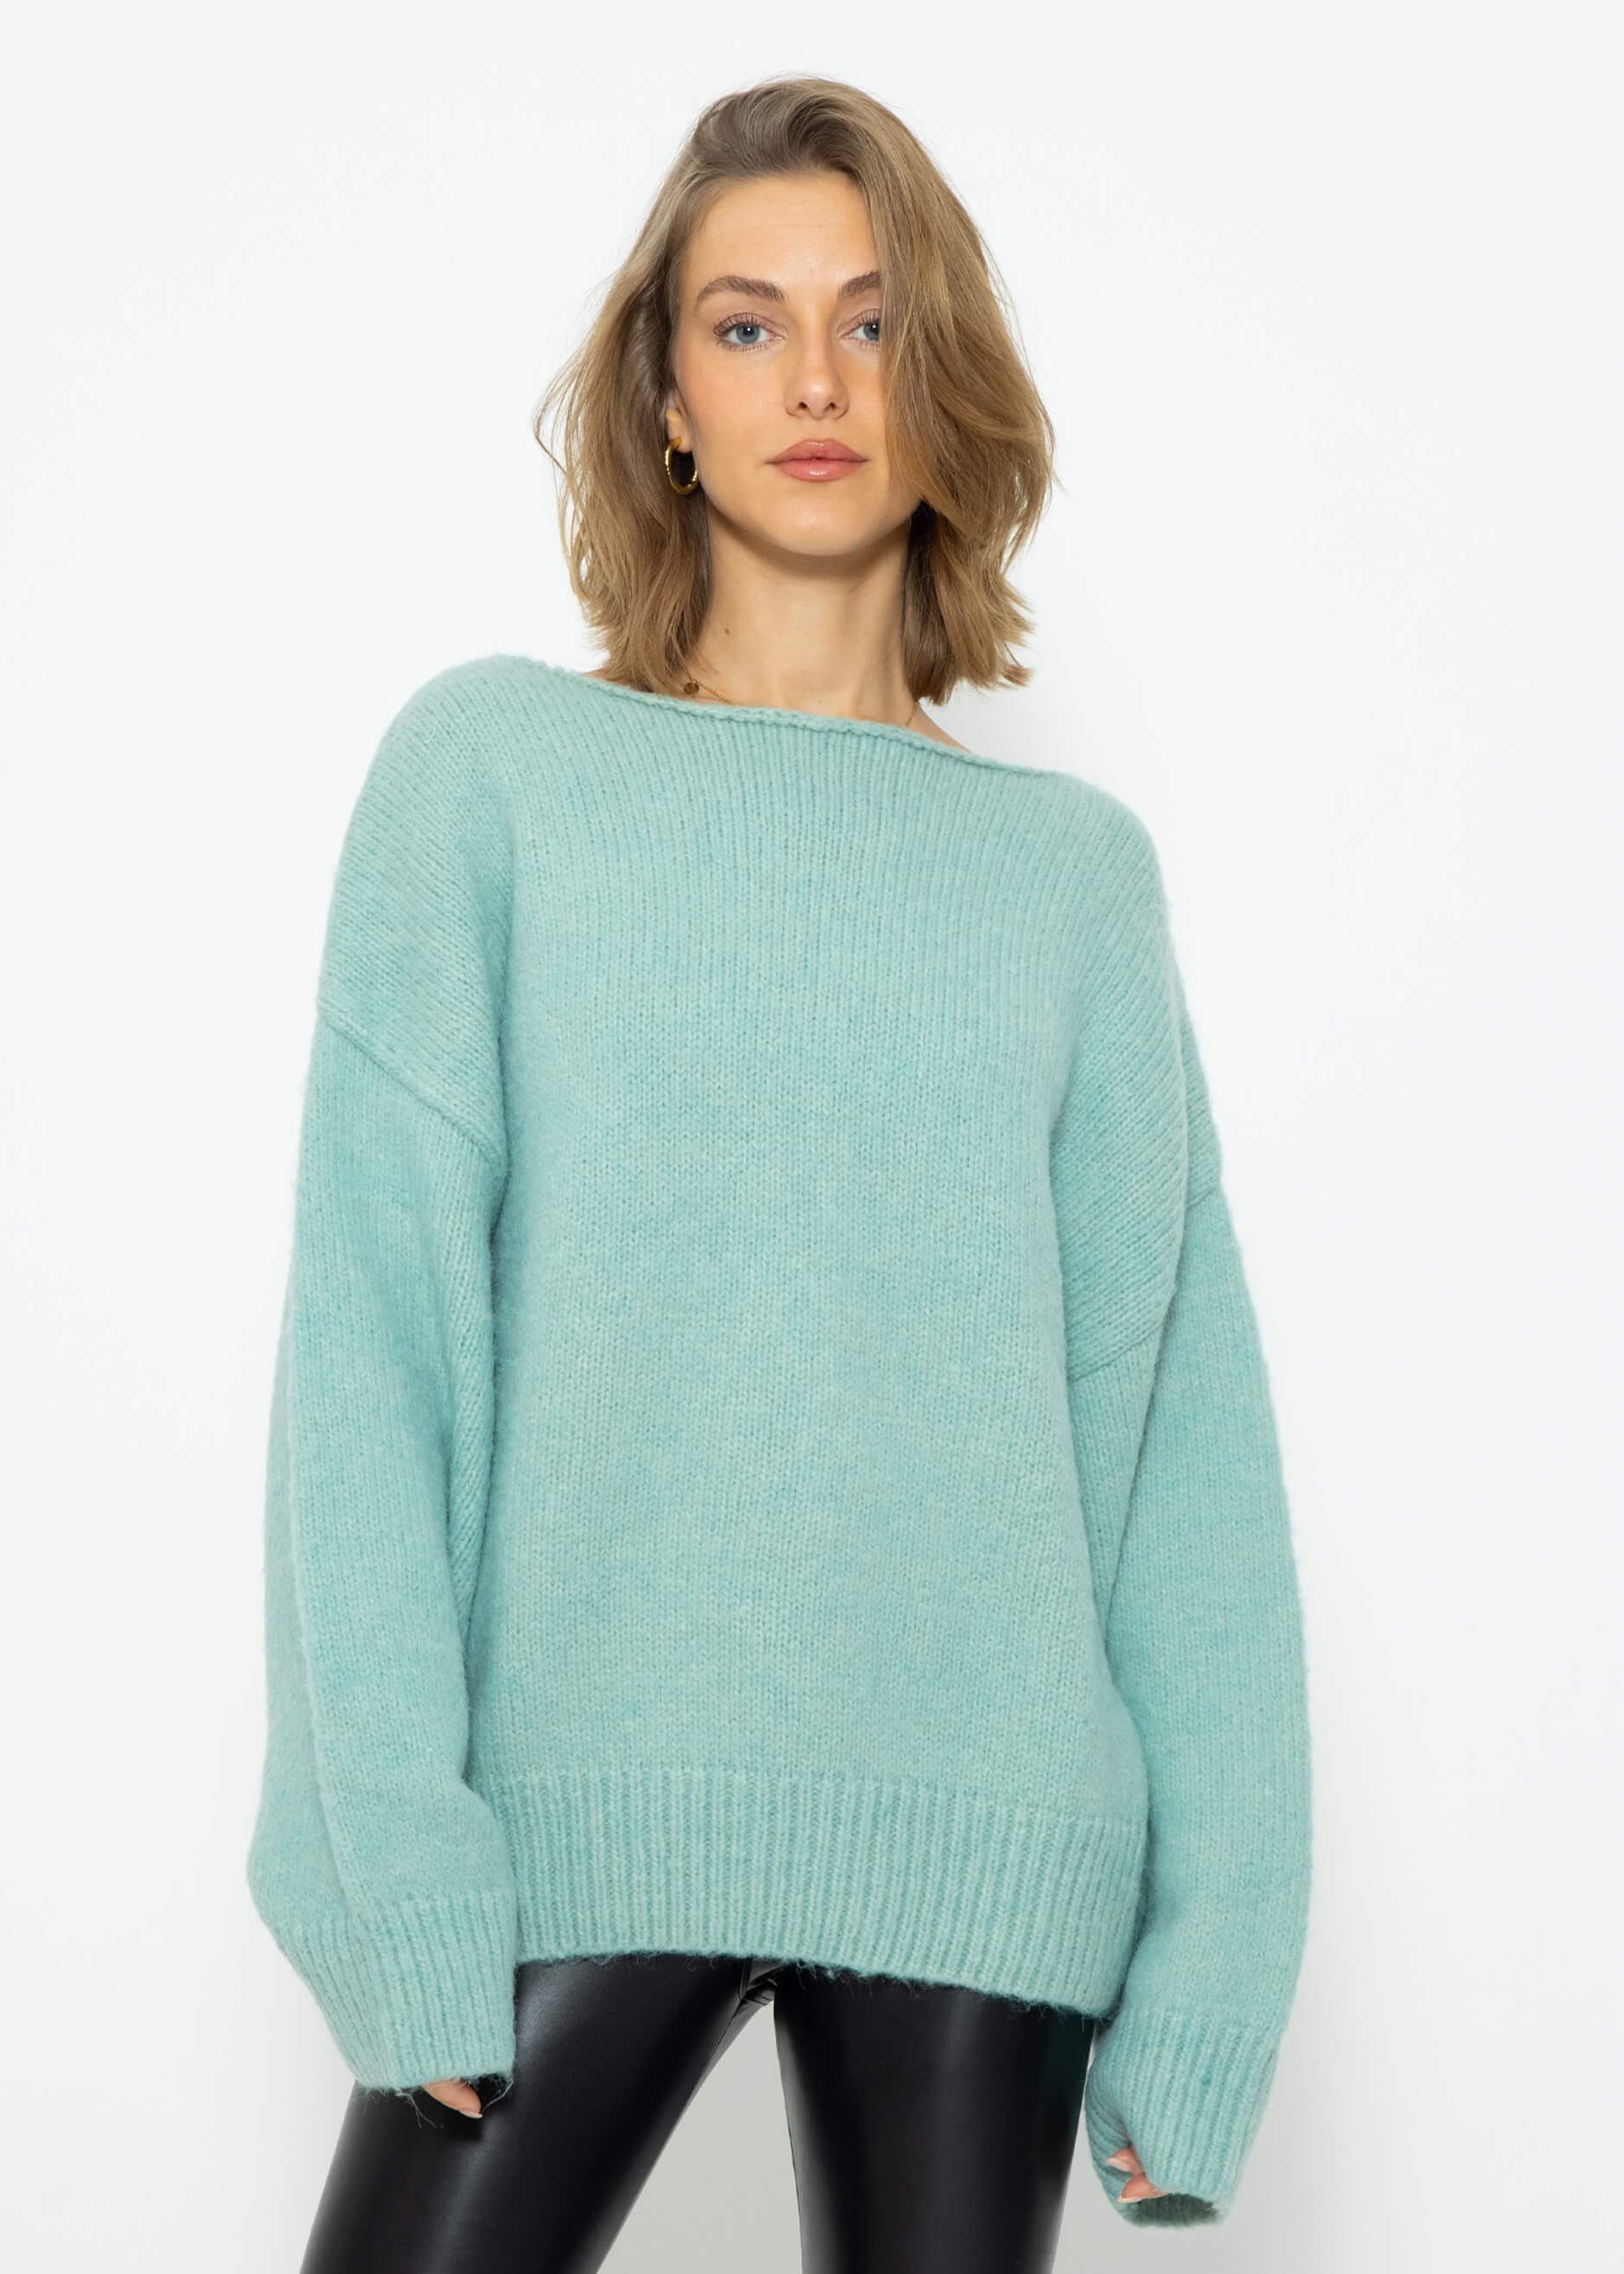 SASSYCLASSY Strickpullover Flauschiger Overisze Pullover Softer Oversize Pullover